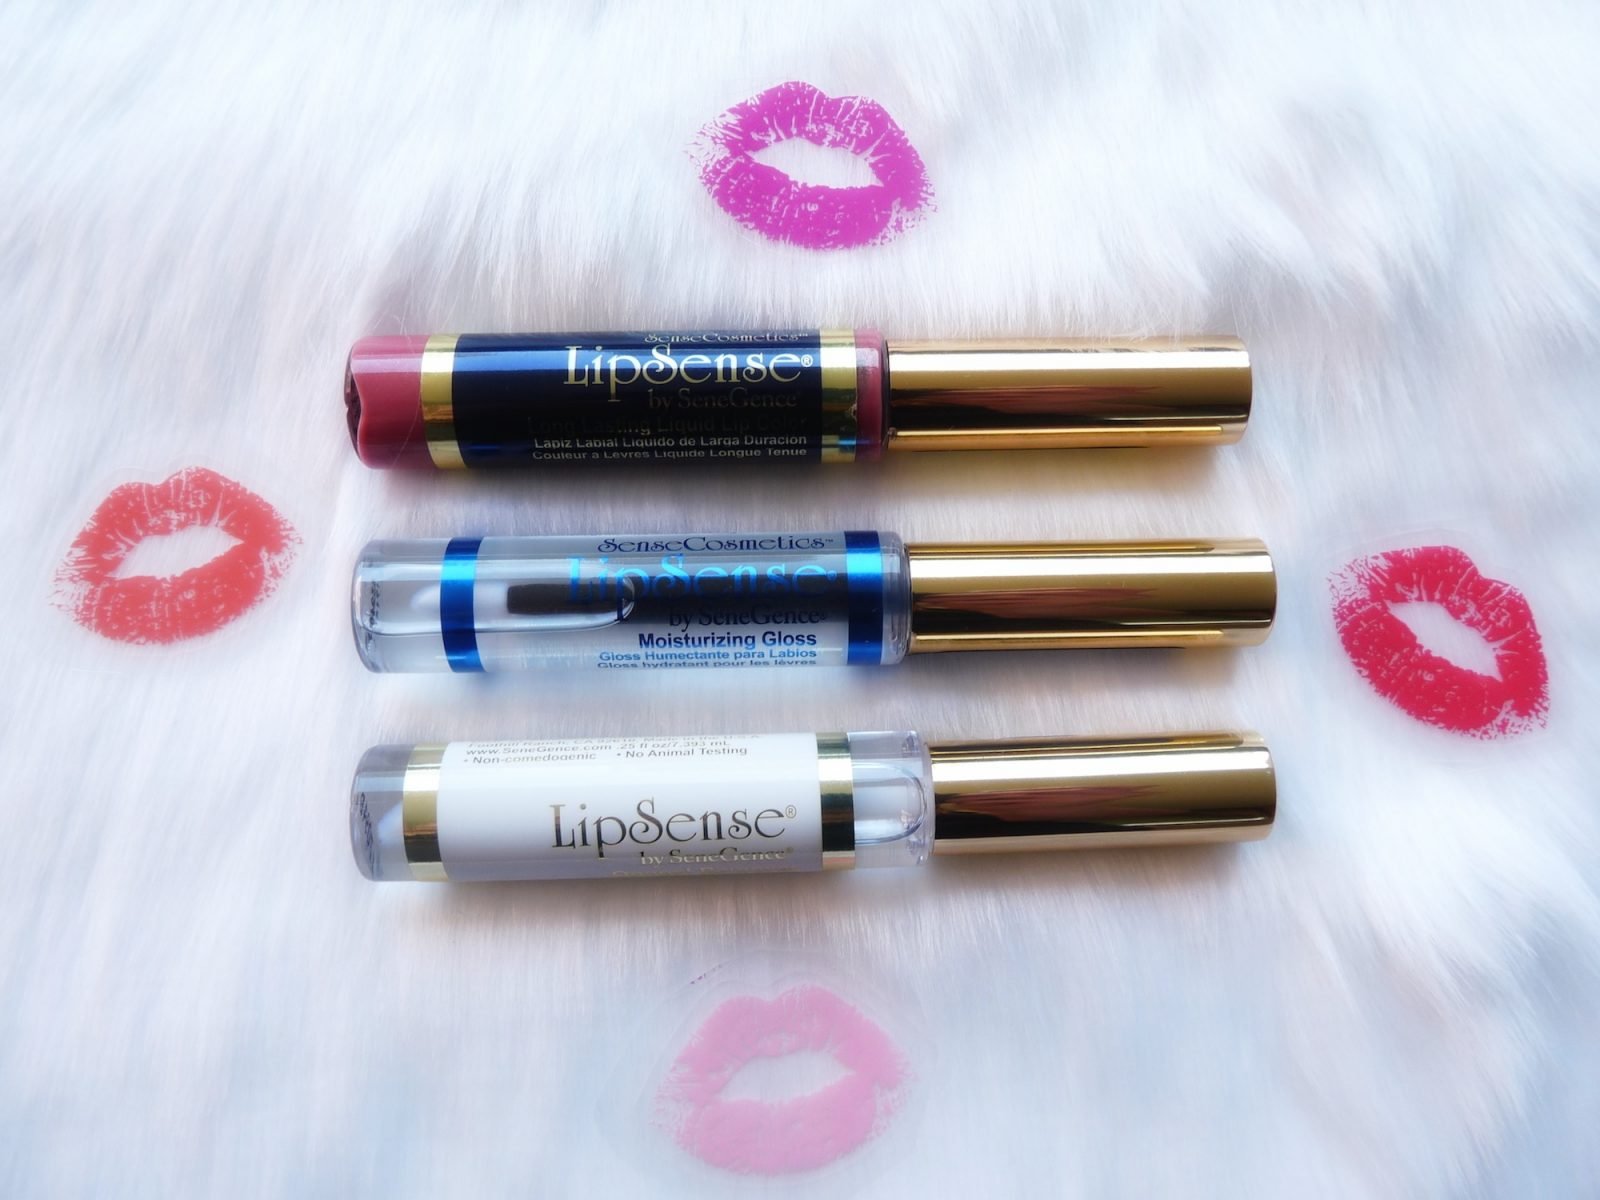 Lipsense Review: Does It Really Last And Look Great?